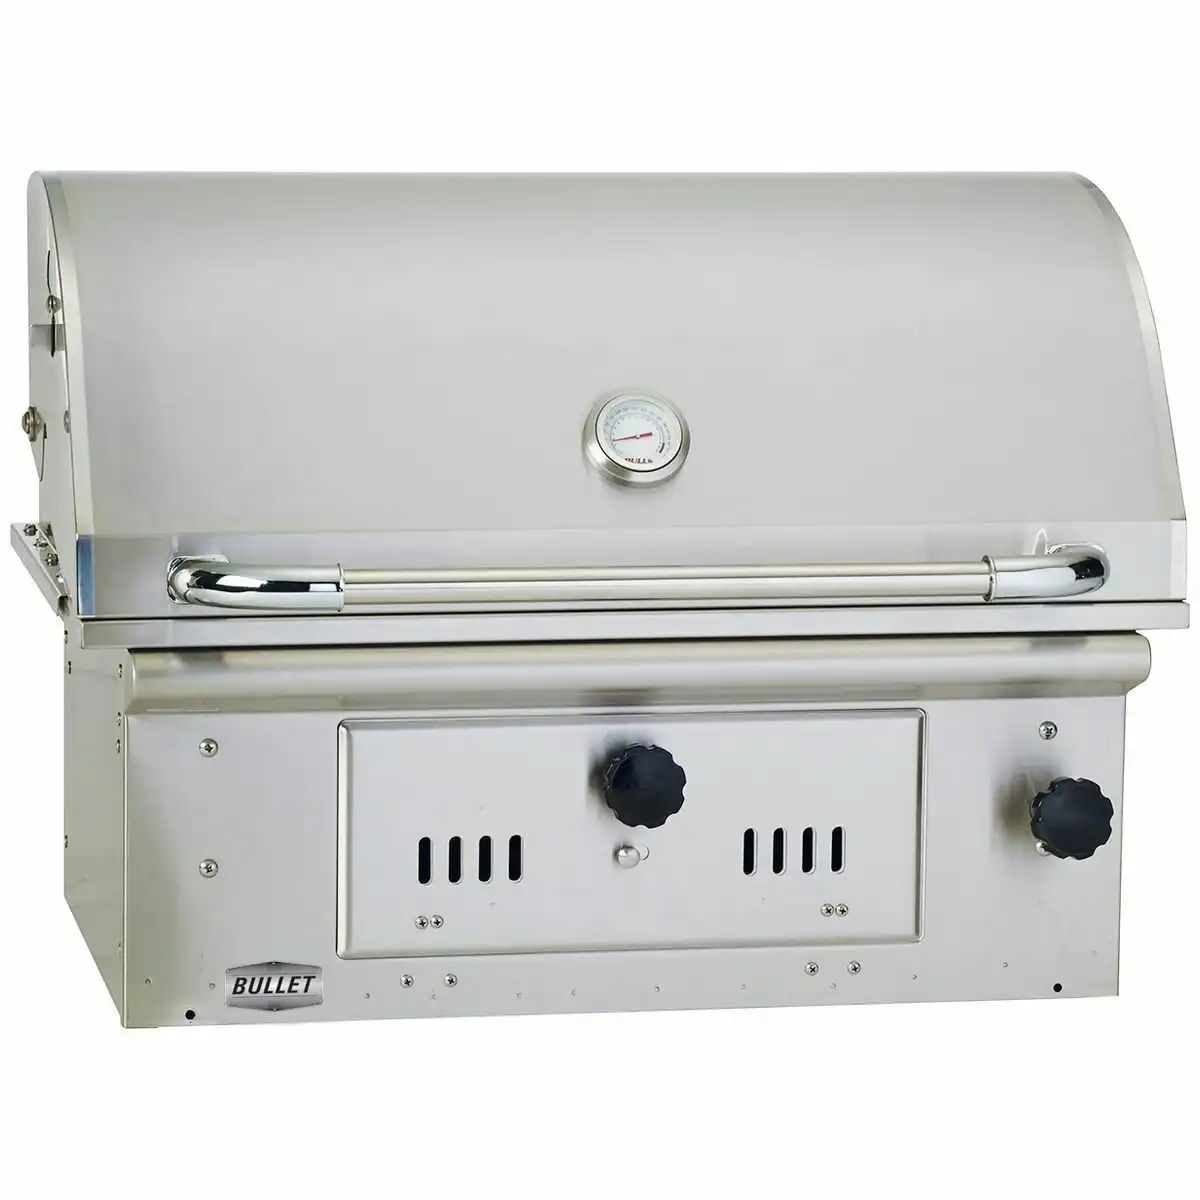 Bullet Bison Charcoal Grill Built-In BBQ